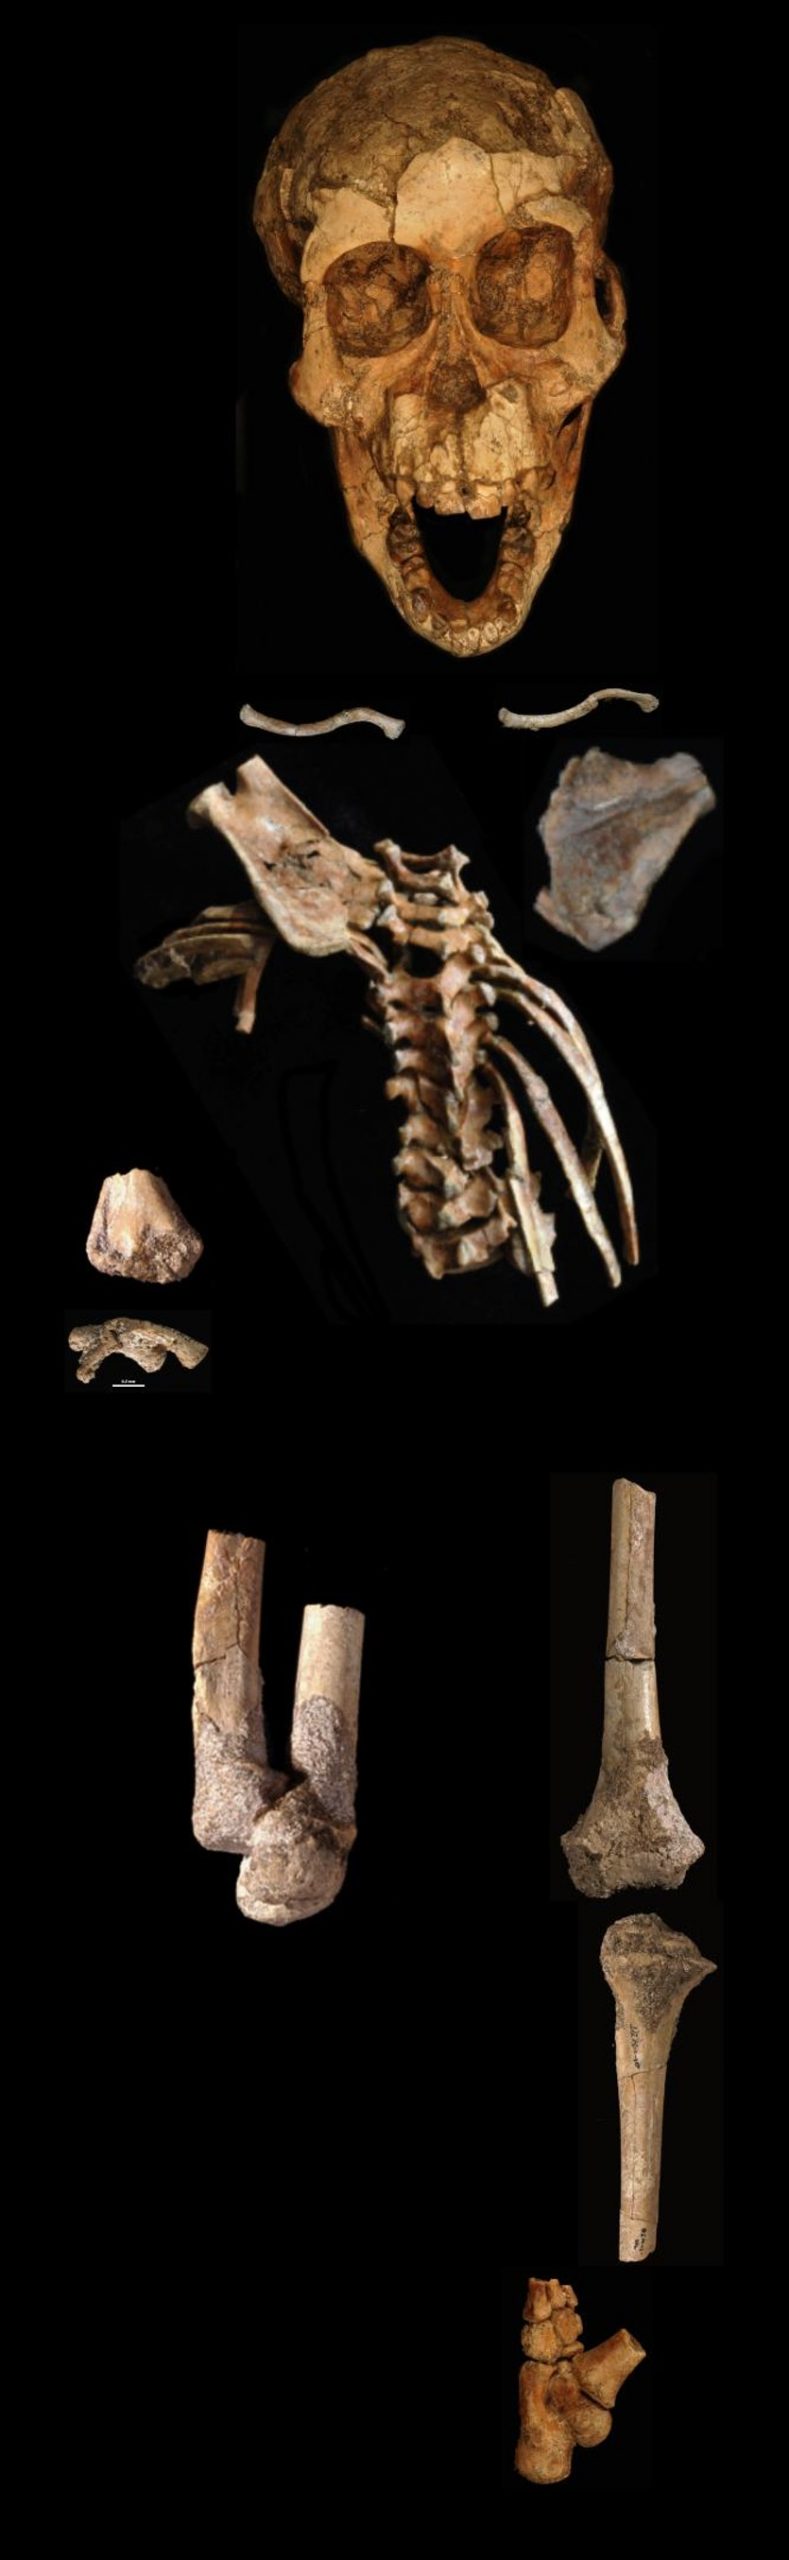 The Dikika foot is one part of a partial skeleton of a 3.32 million-year-old skeleton of an Australopithecus afarensis child.